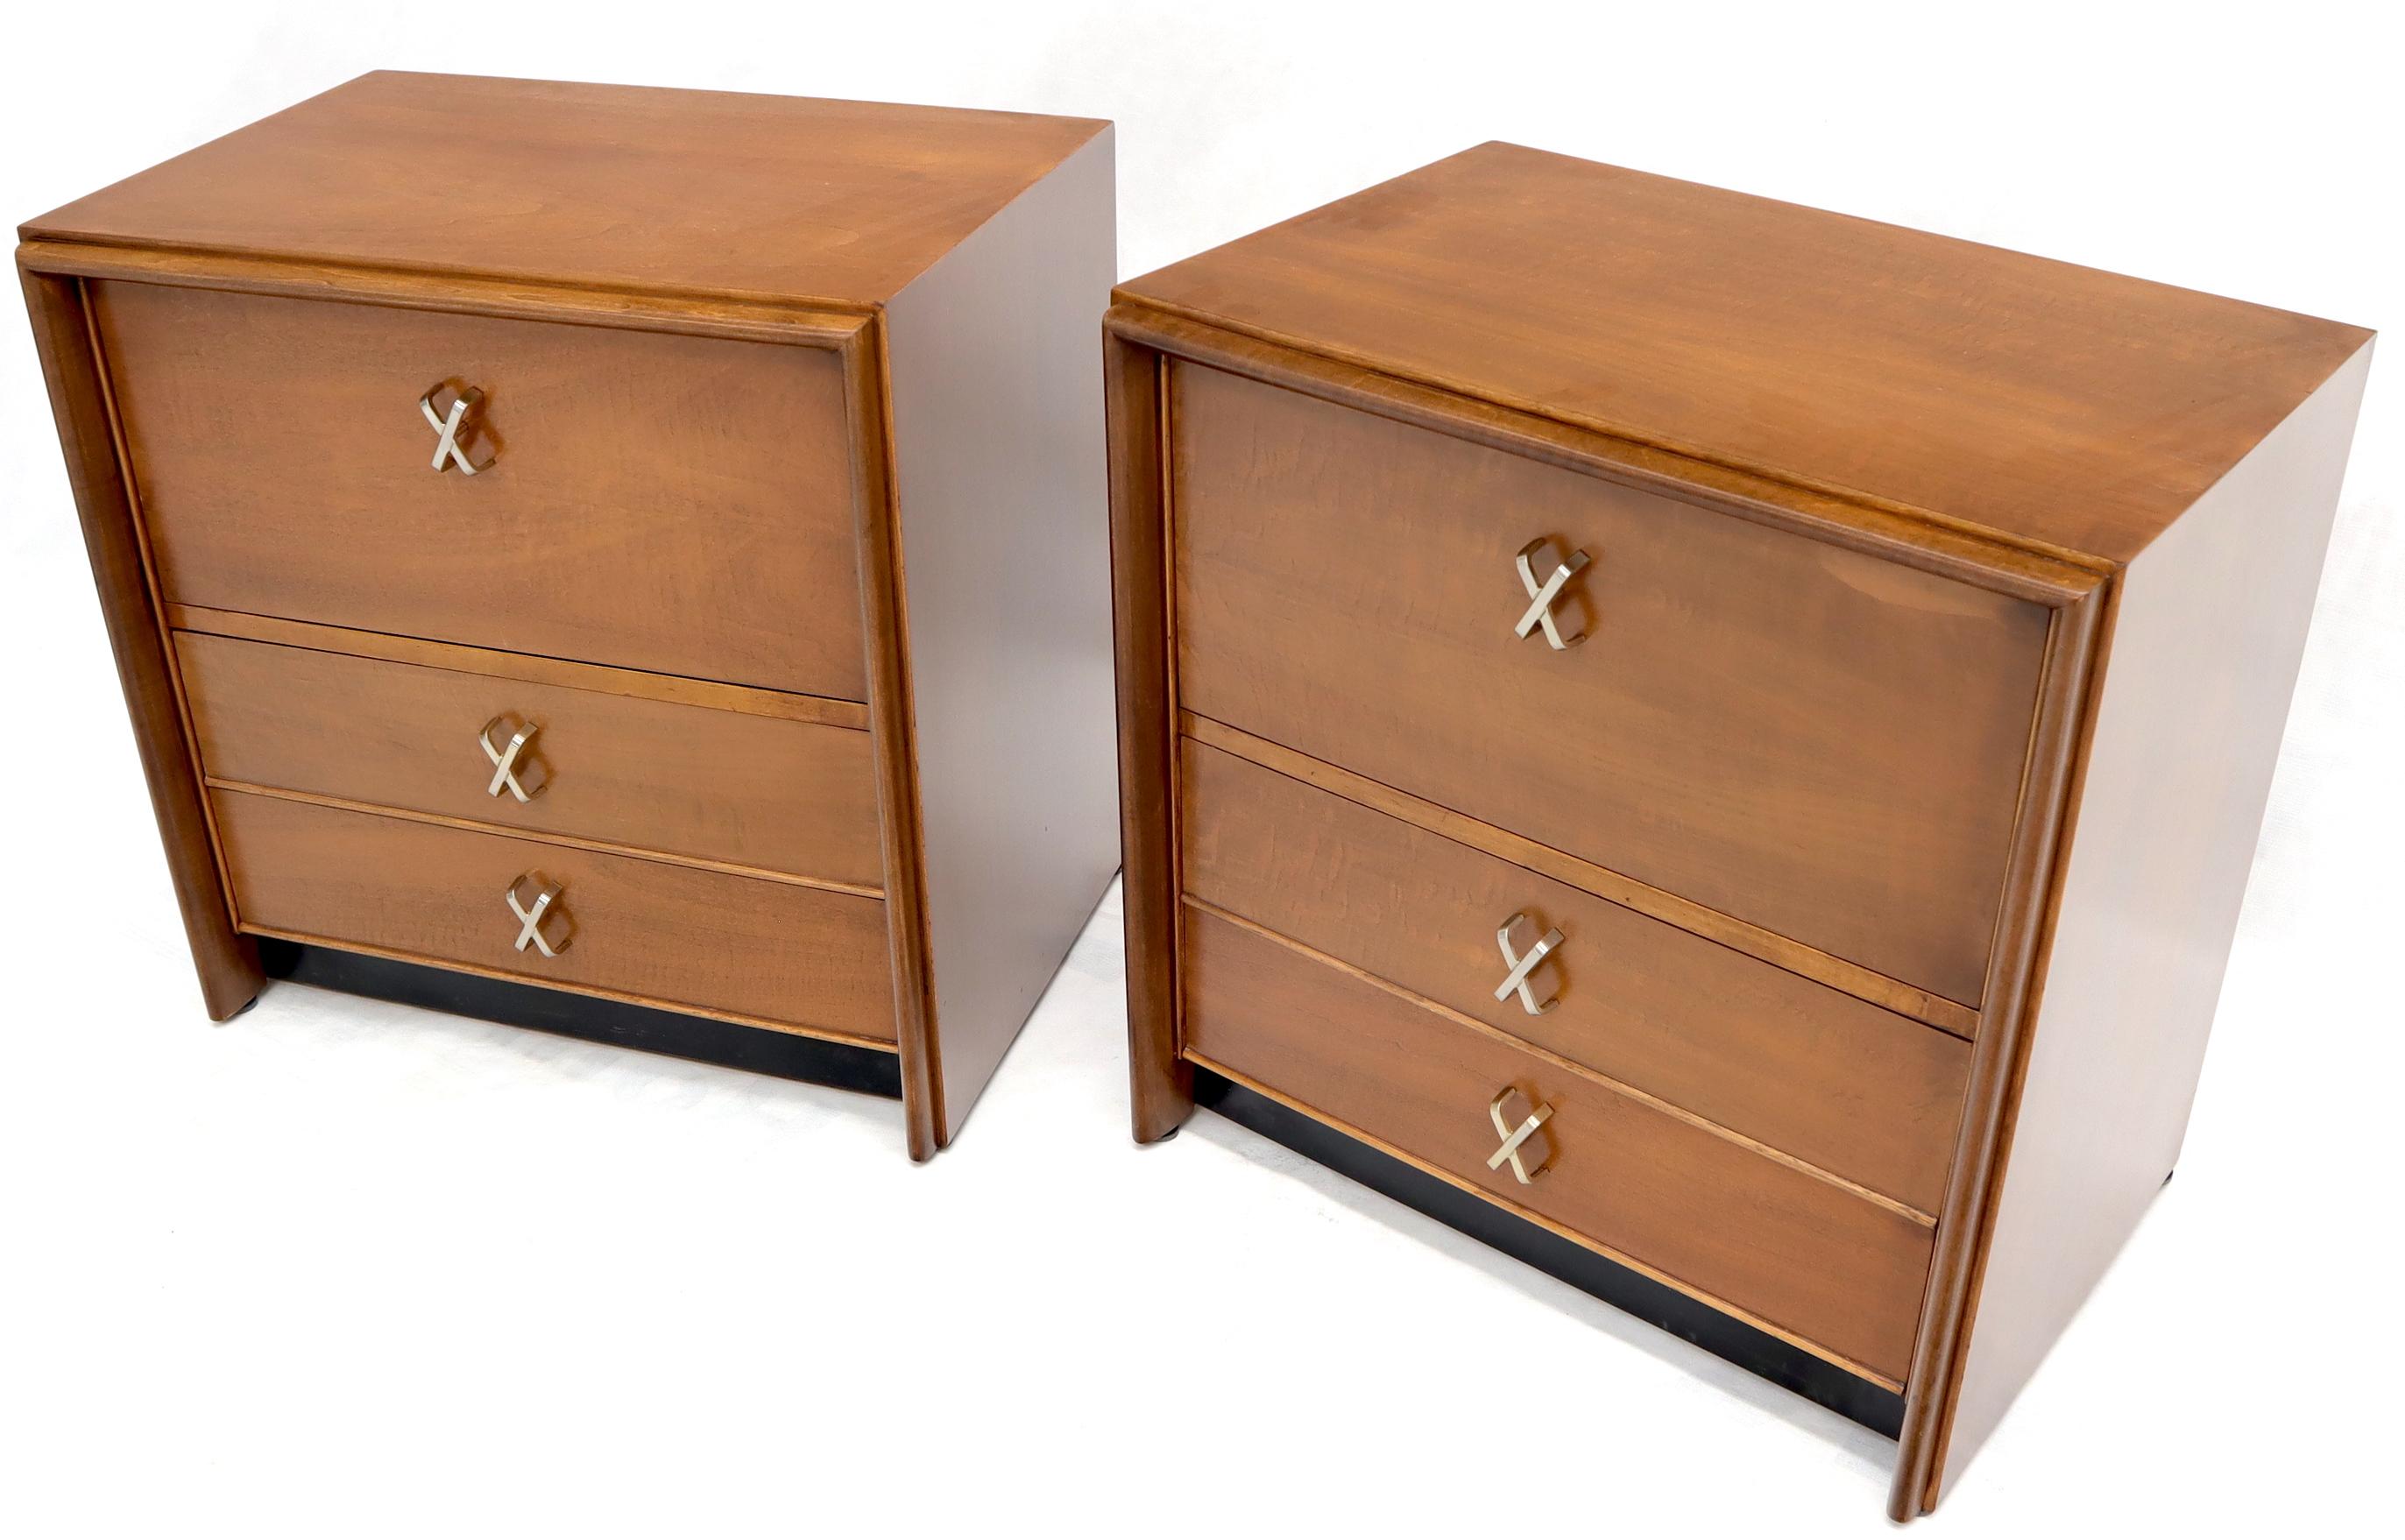 Pair of Mid-Century Modern nightstands by Paul Frankl for Johnson Furniture Company.
Tan leather color finish silver X pulls.